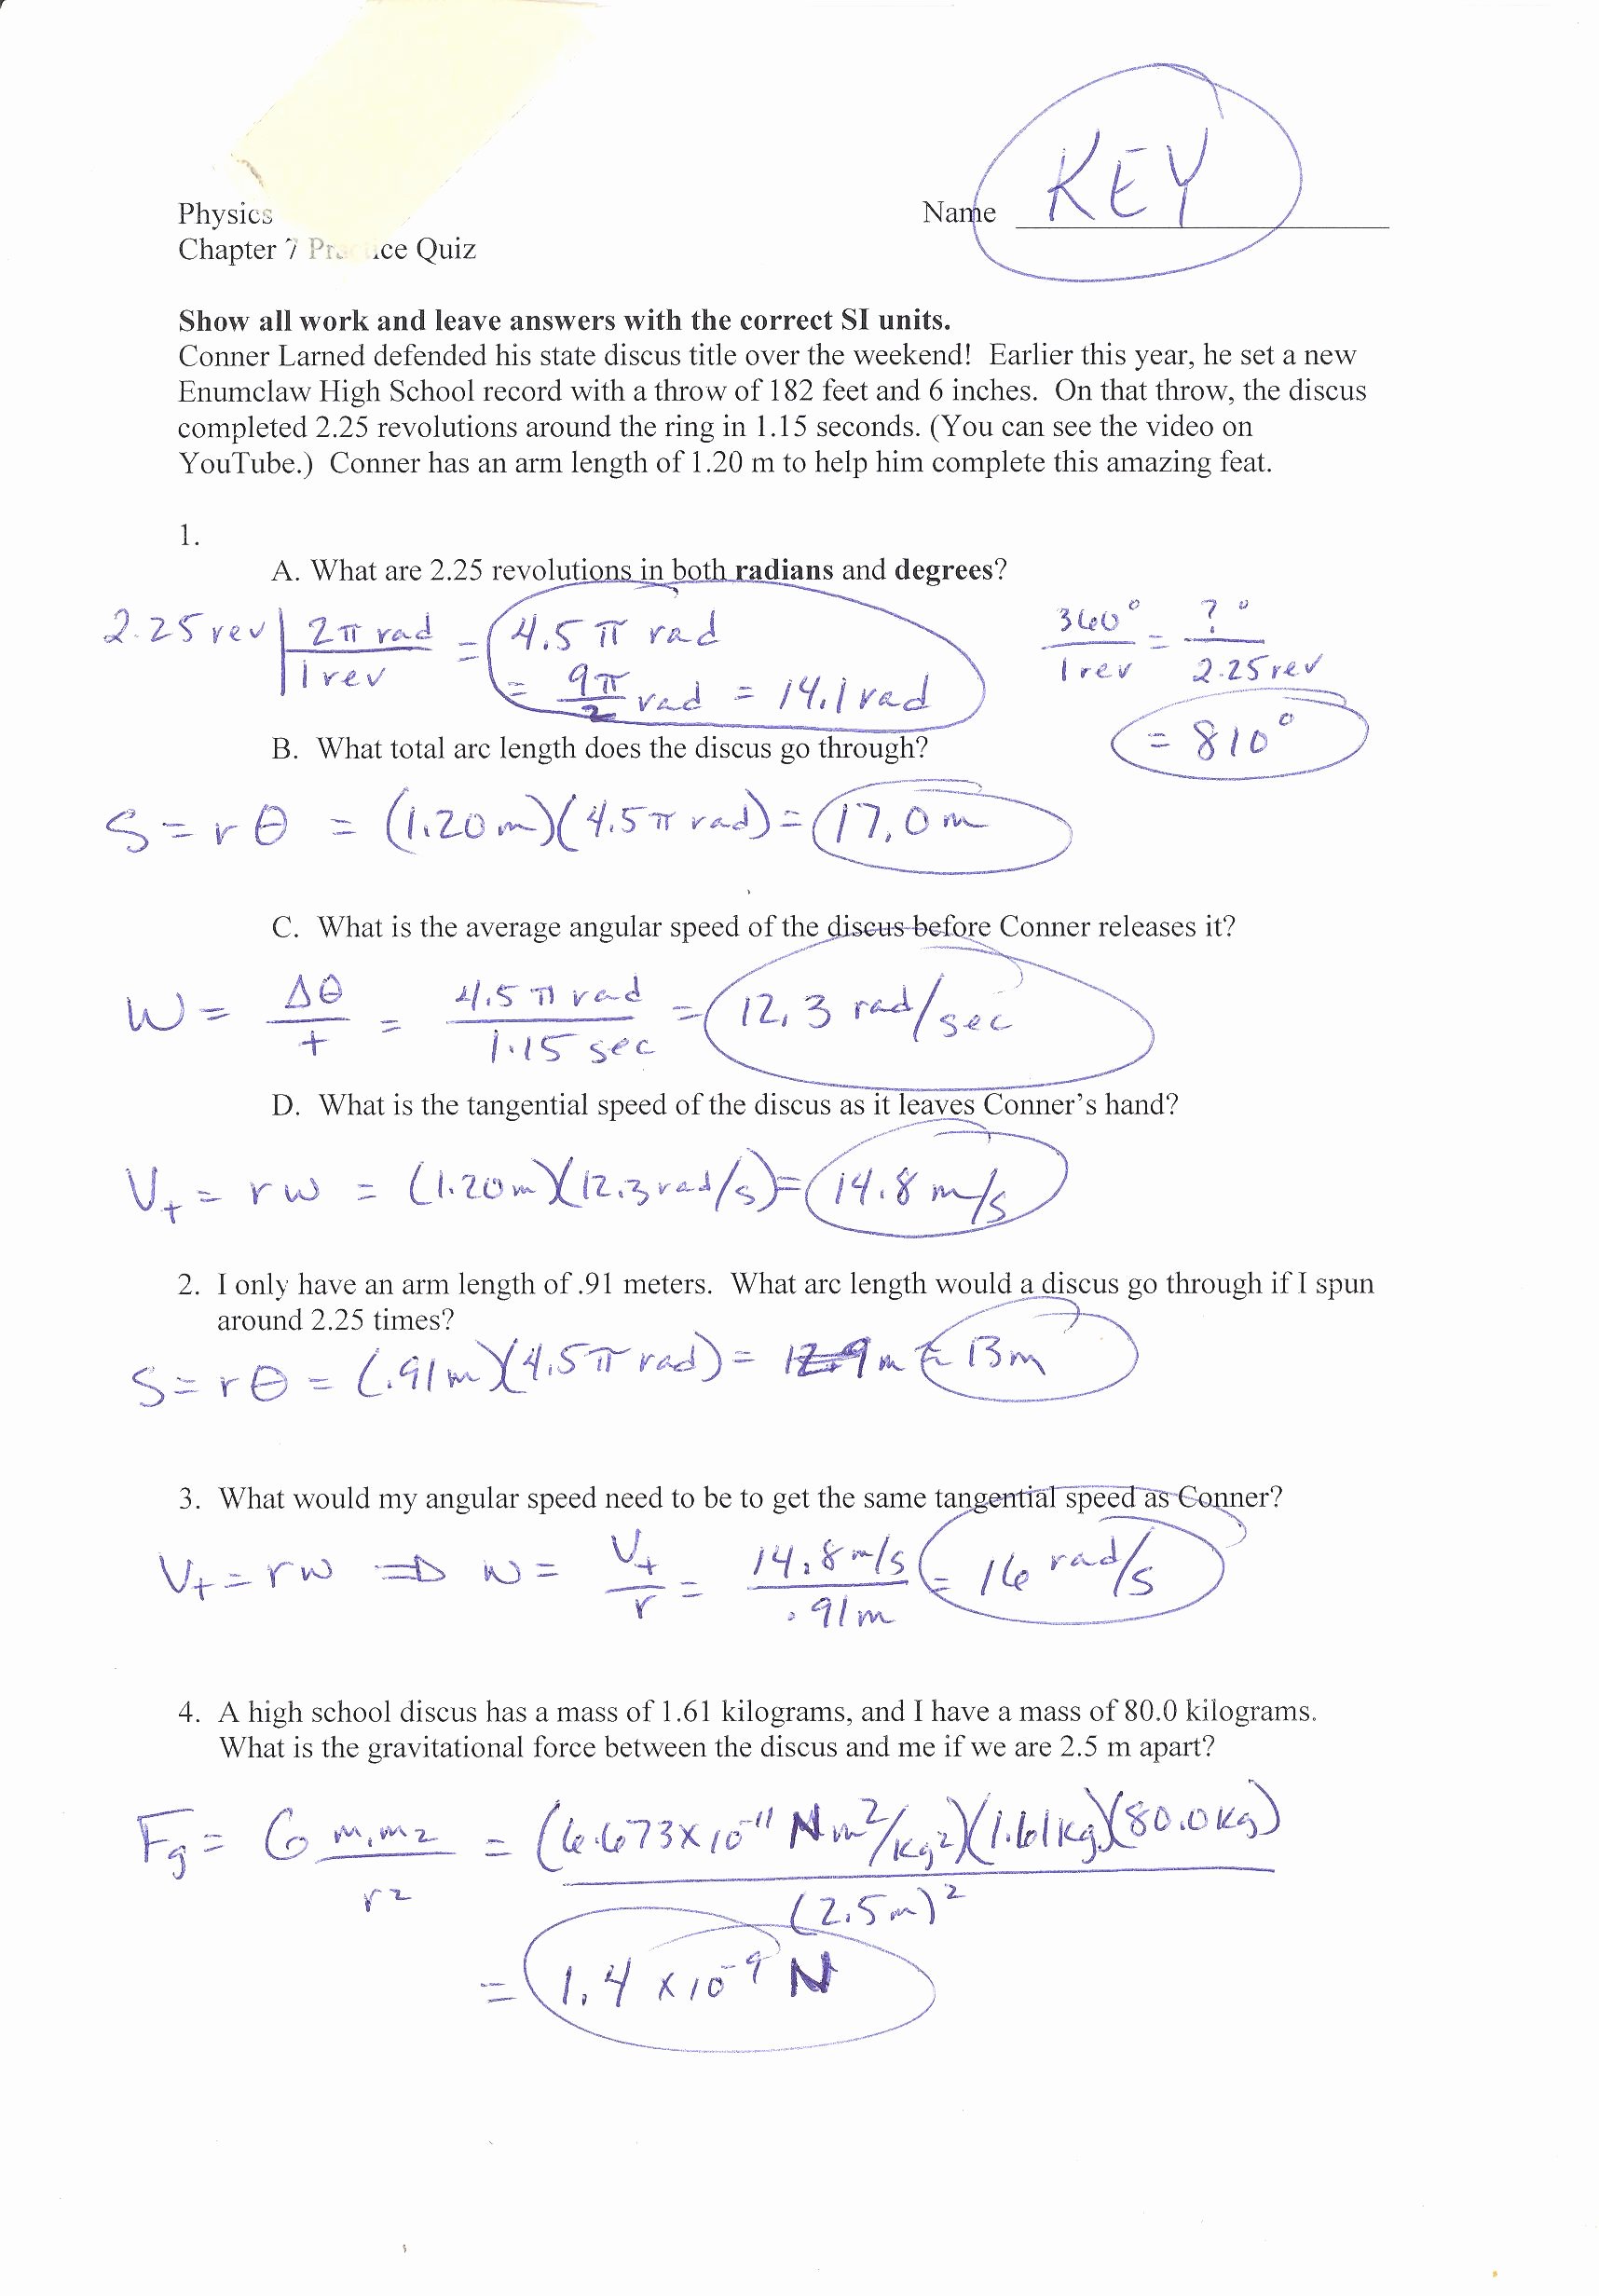 Friction and Gravity Worksheet Answers Elegant Gravity and Motion Worksheet Answer Key Worksheets for Kids